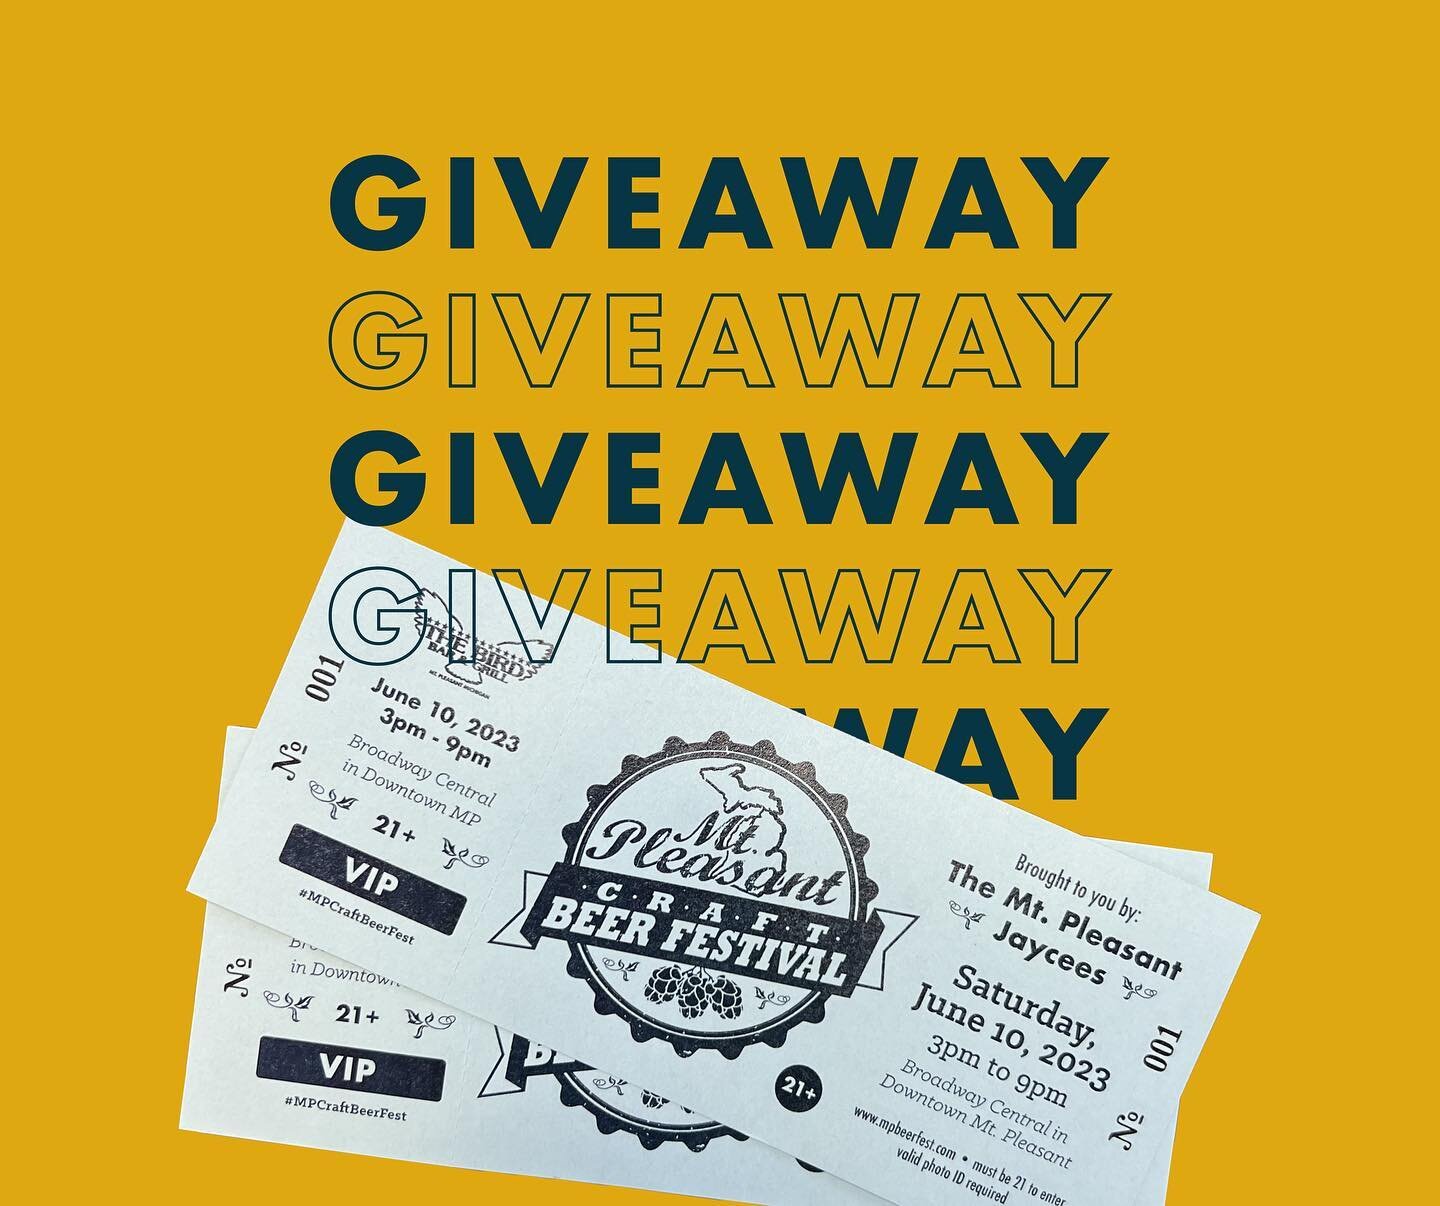 GIVEAWAY TIME!🎉 The Mt. Pleasant Craft Beer Festival is only a week away🍻

We're giving away 🎟 2 VIP Tickets ($100 value)

Here's how to enter👇
1. Follow @mpcraftbeerfest if you don&rsquo;t already
2. Share this post to your story
3. Tag at least